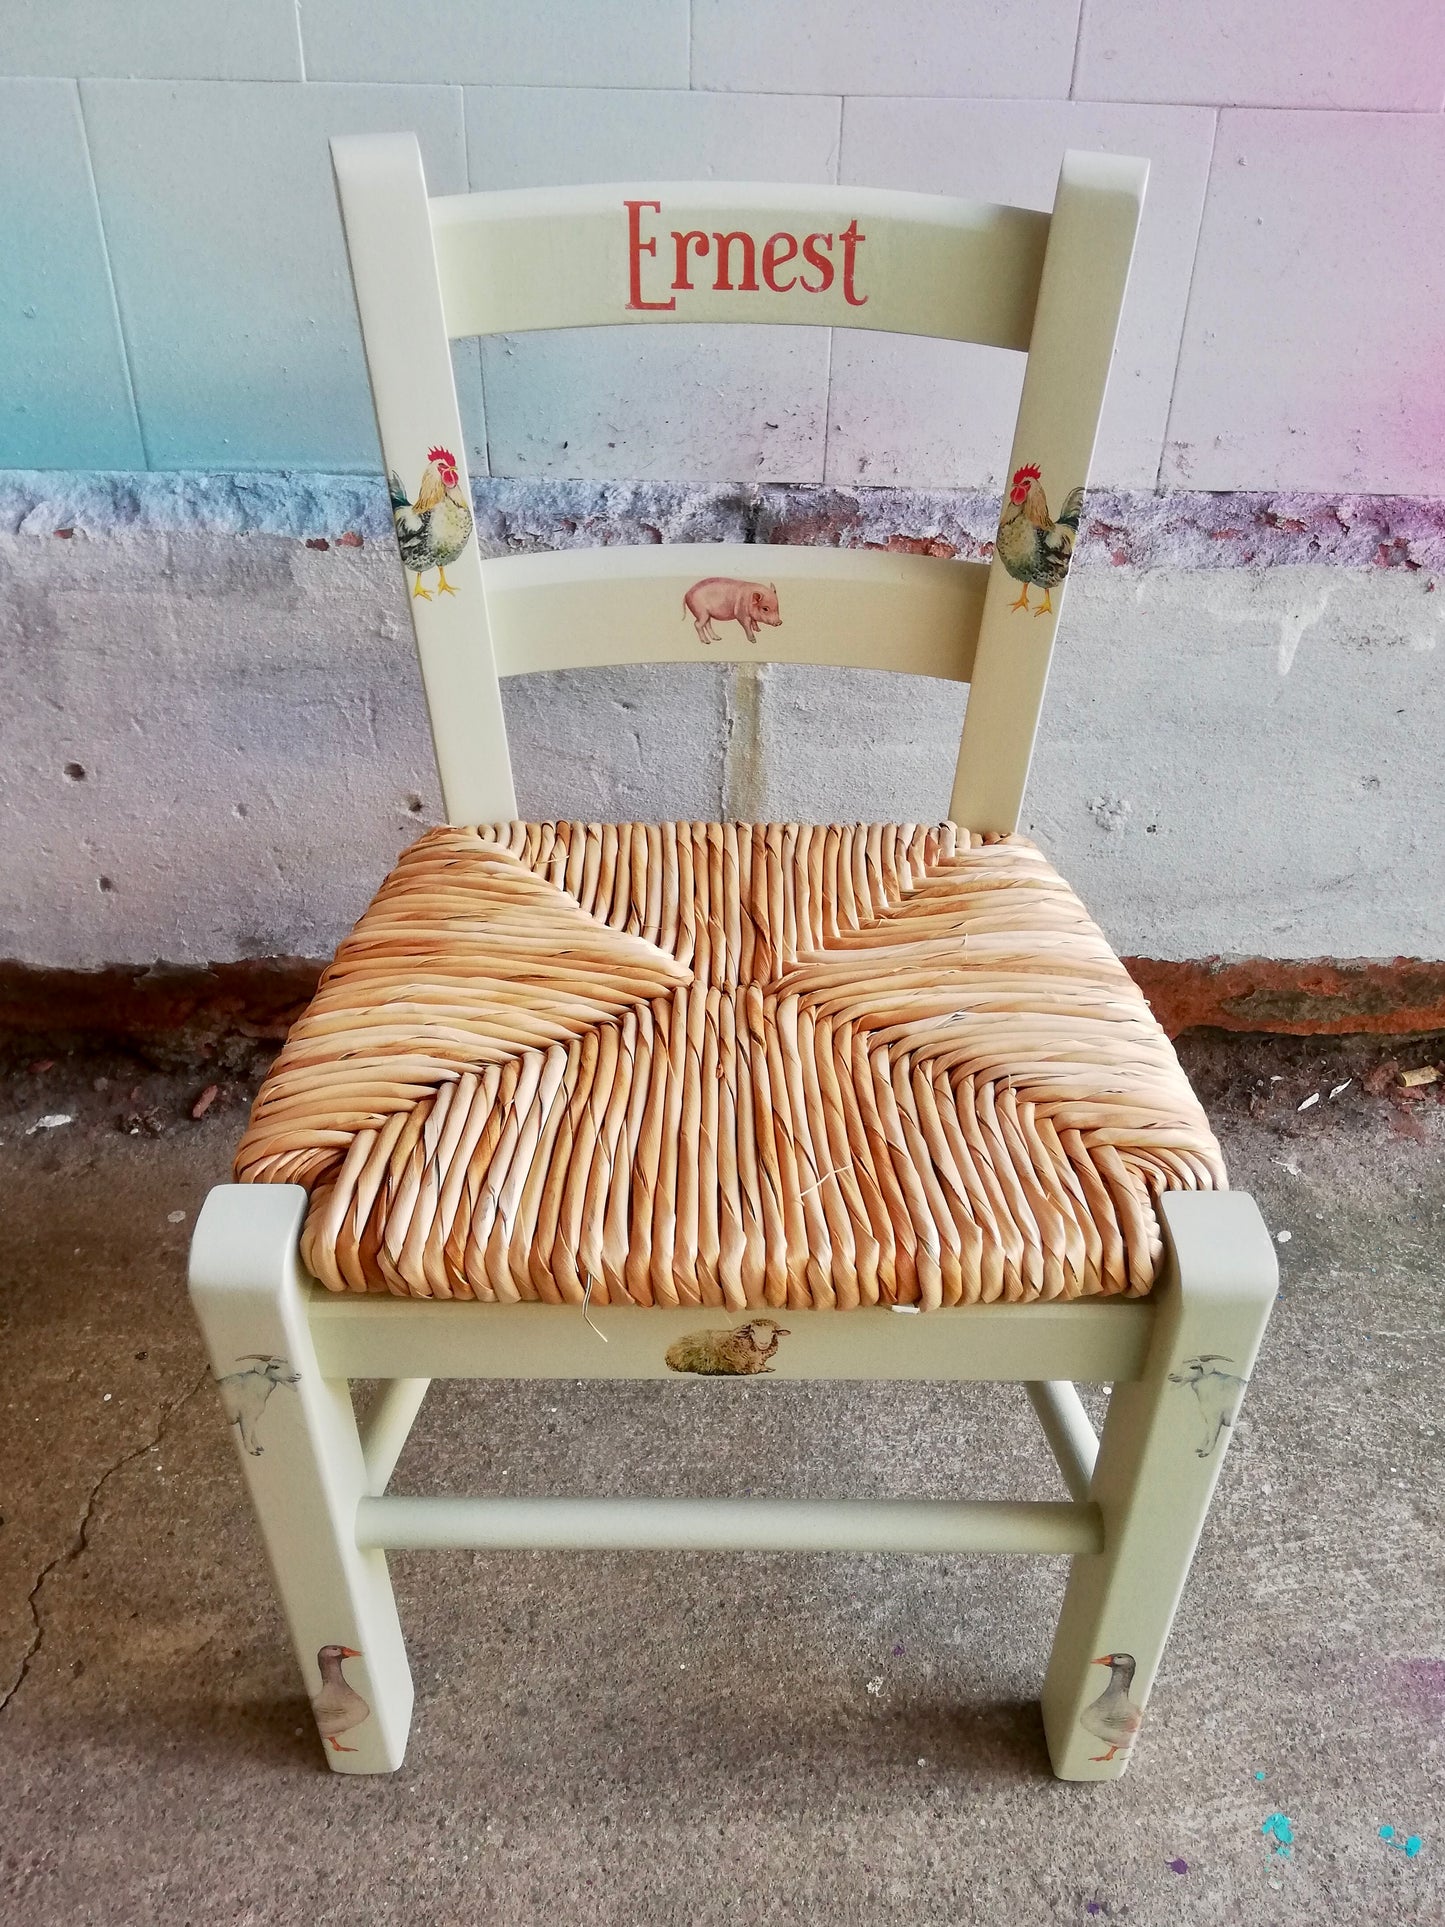 Commission for Emily kettle personalised children's chair with farm yard theme